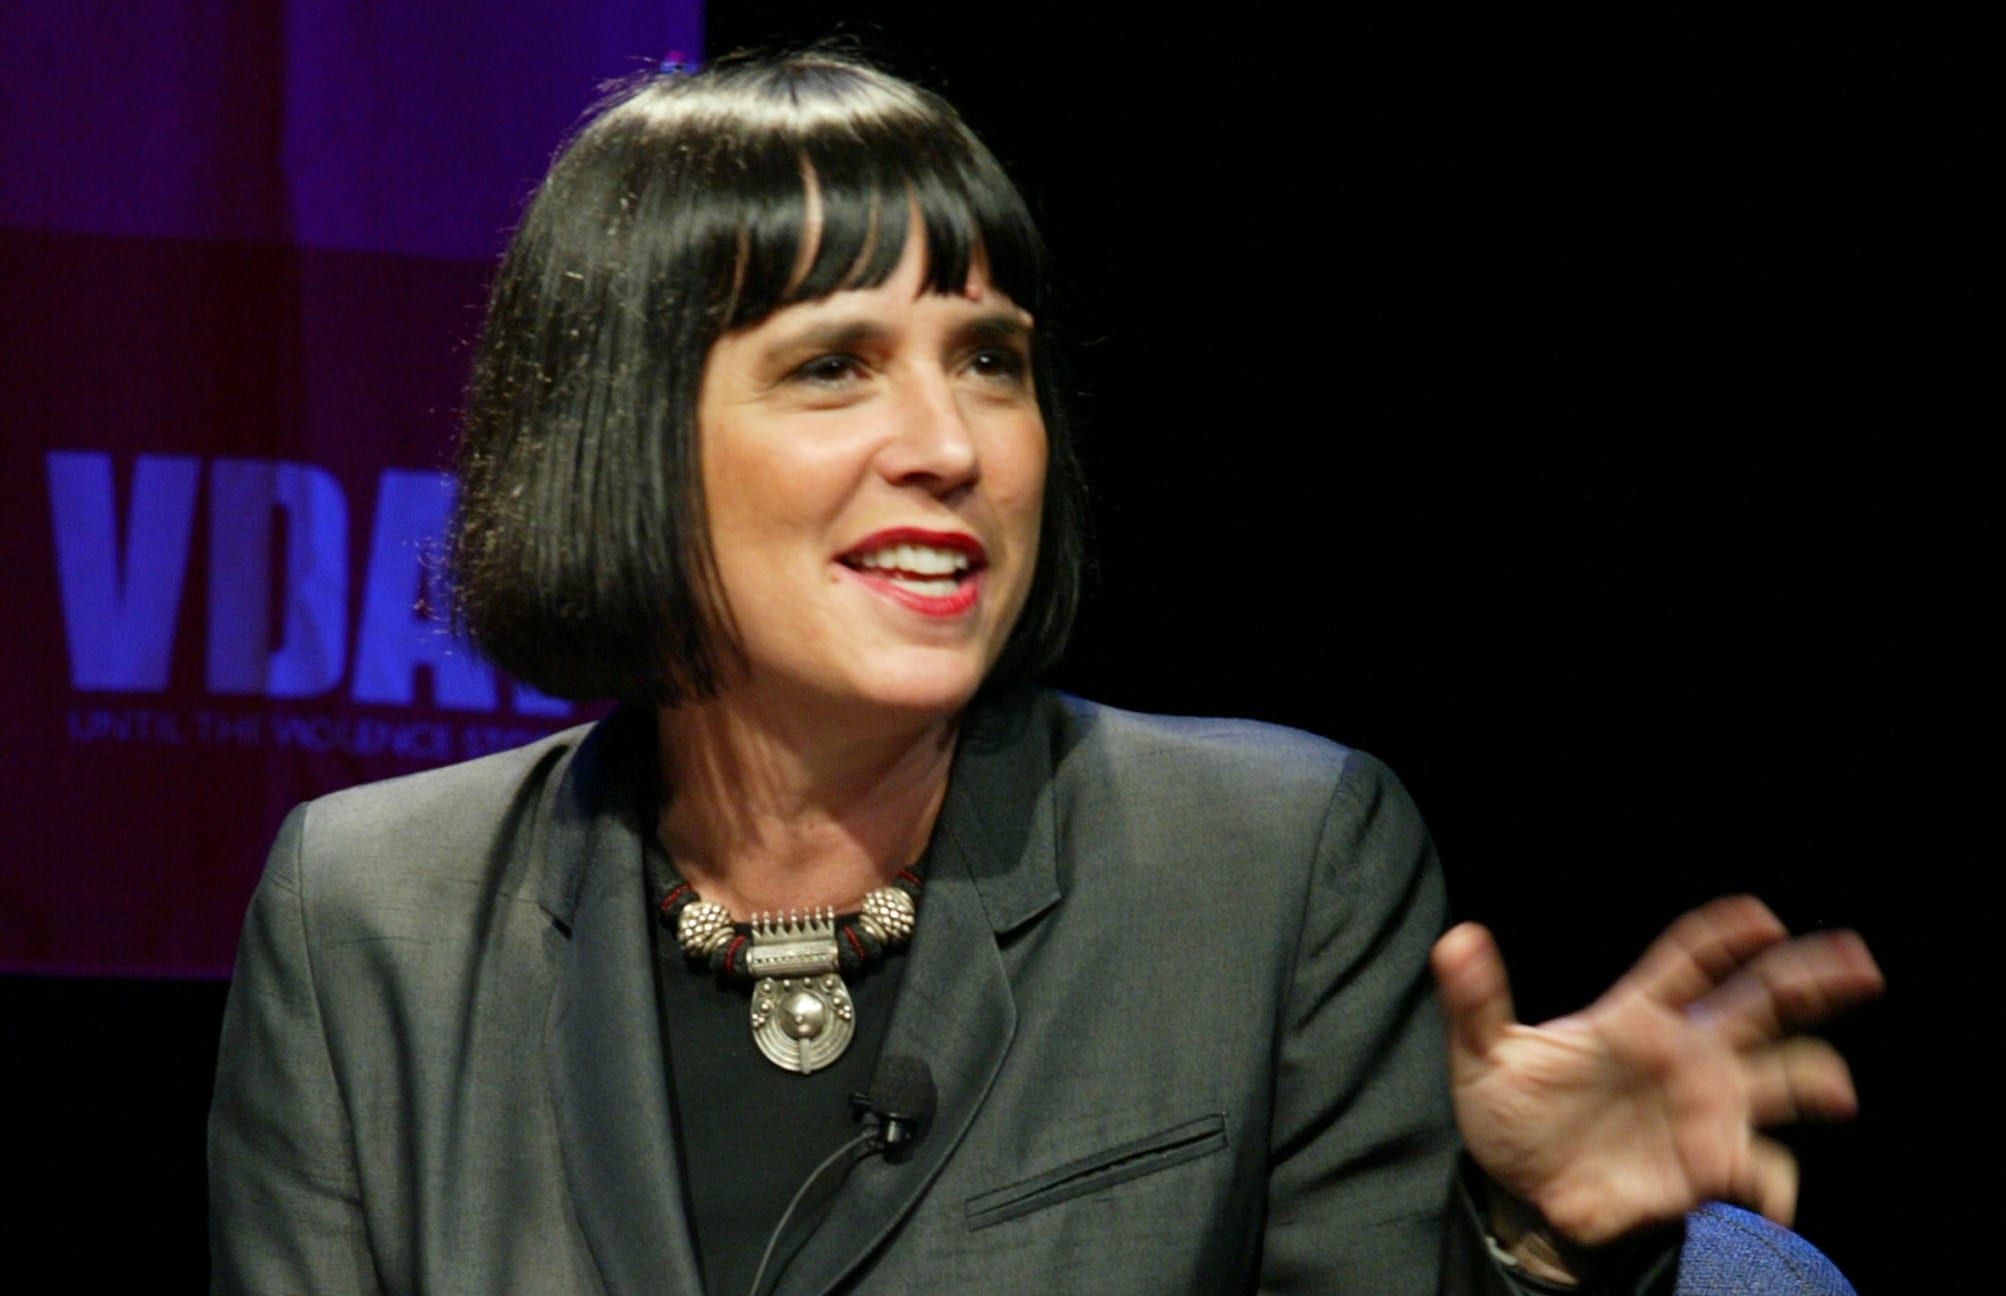 Eve Ensler is the author of the hugely successful play The Vagina Monologues and the founder of V-Day – a global movement to end violence against women and girls.